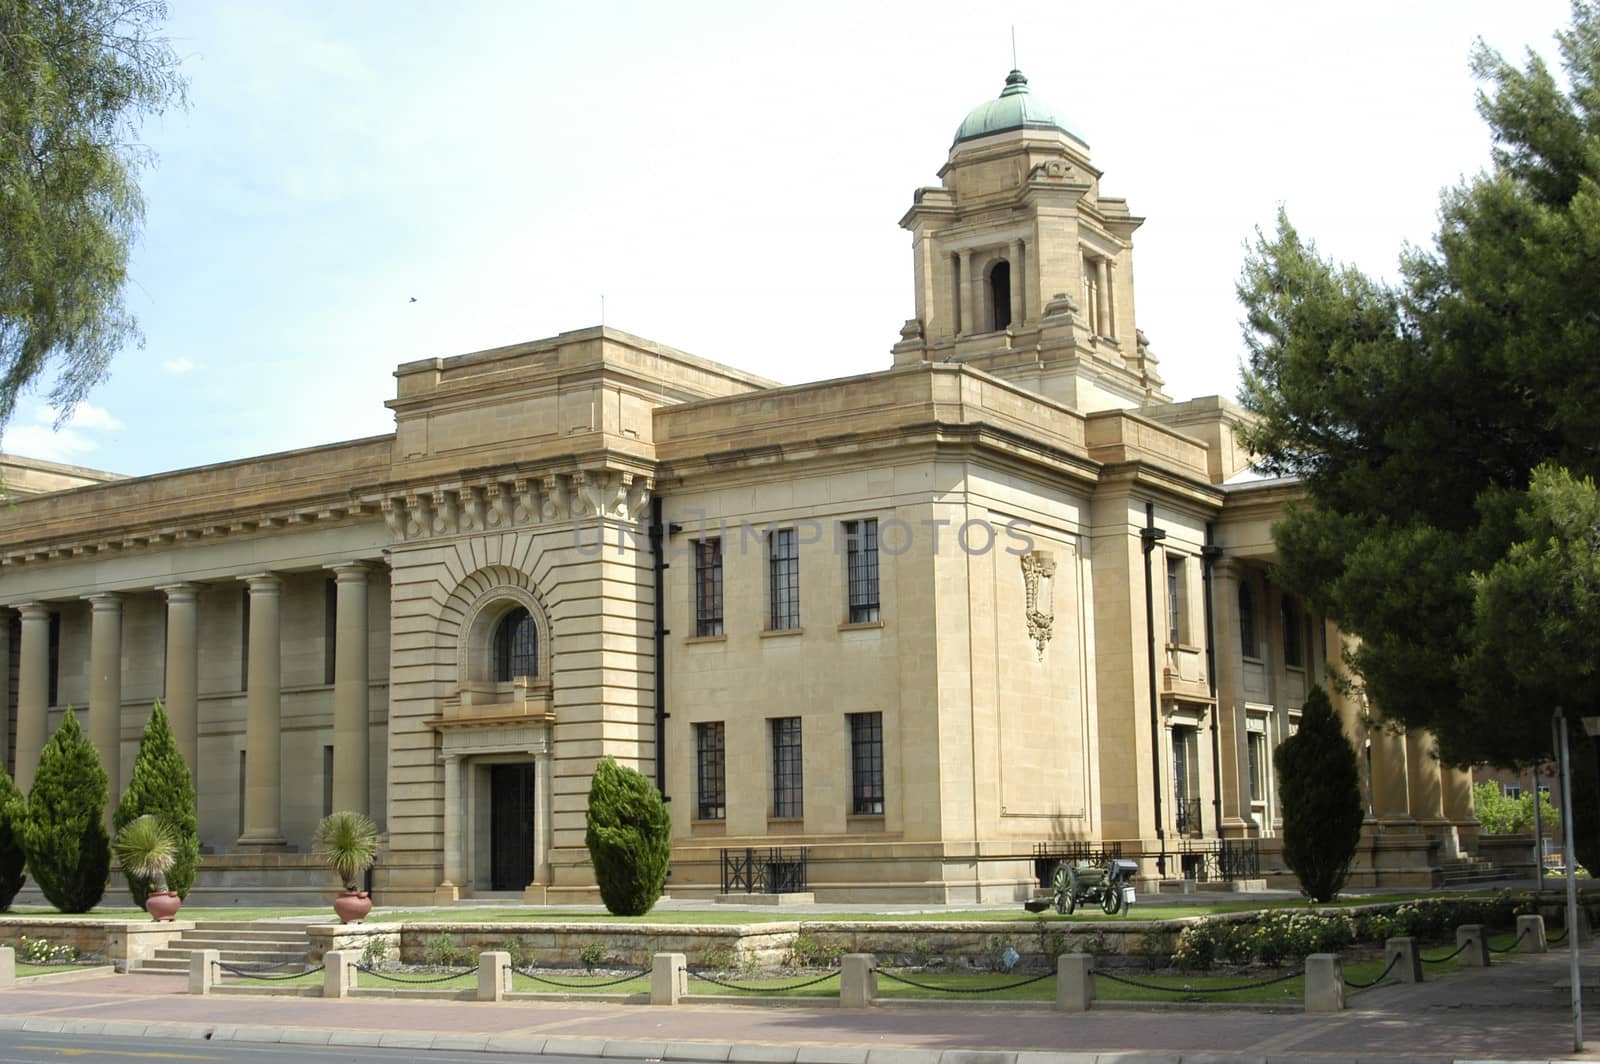 Supreme court, built with sandstone, Bloemfontein, South Africa